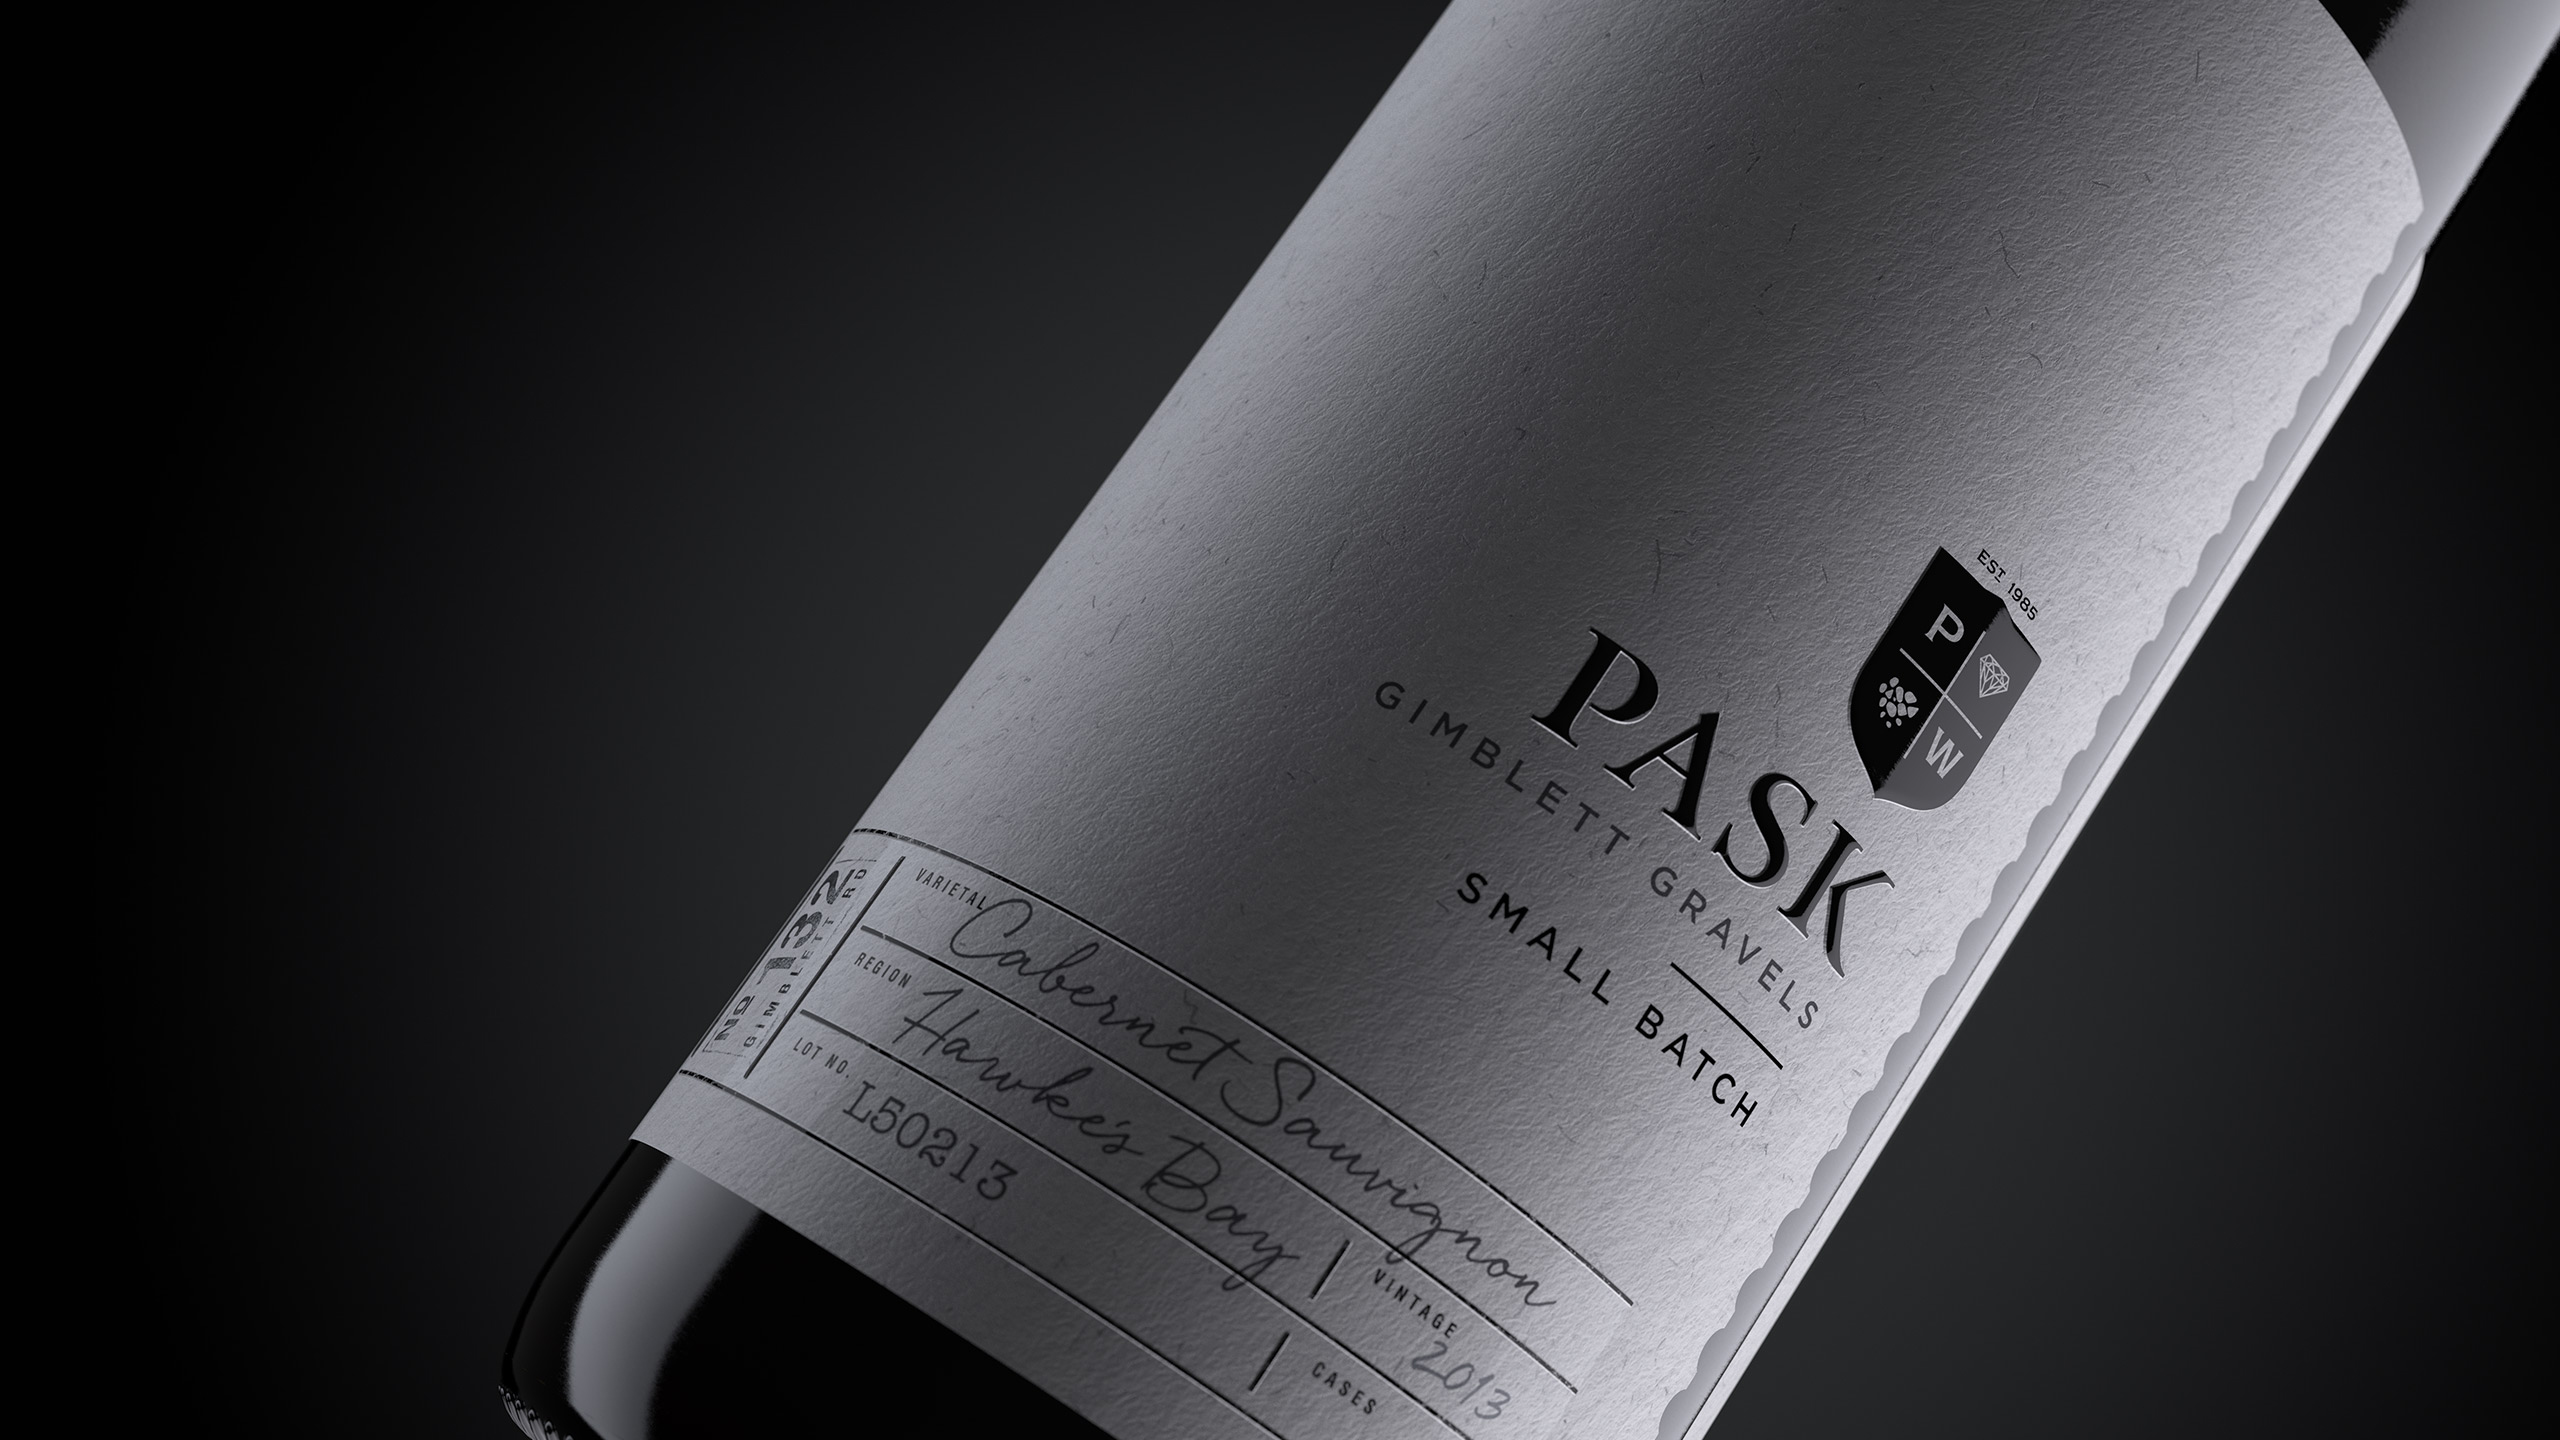 Tried-and-True-Design-Auckland-Pask-Winery-rebrand-wine-small-batch